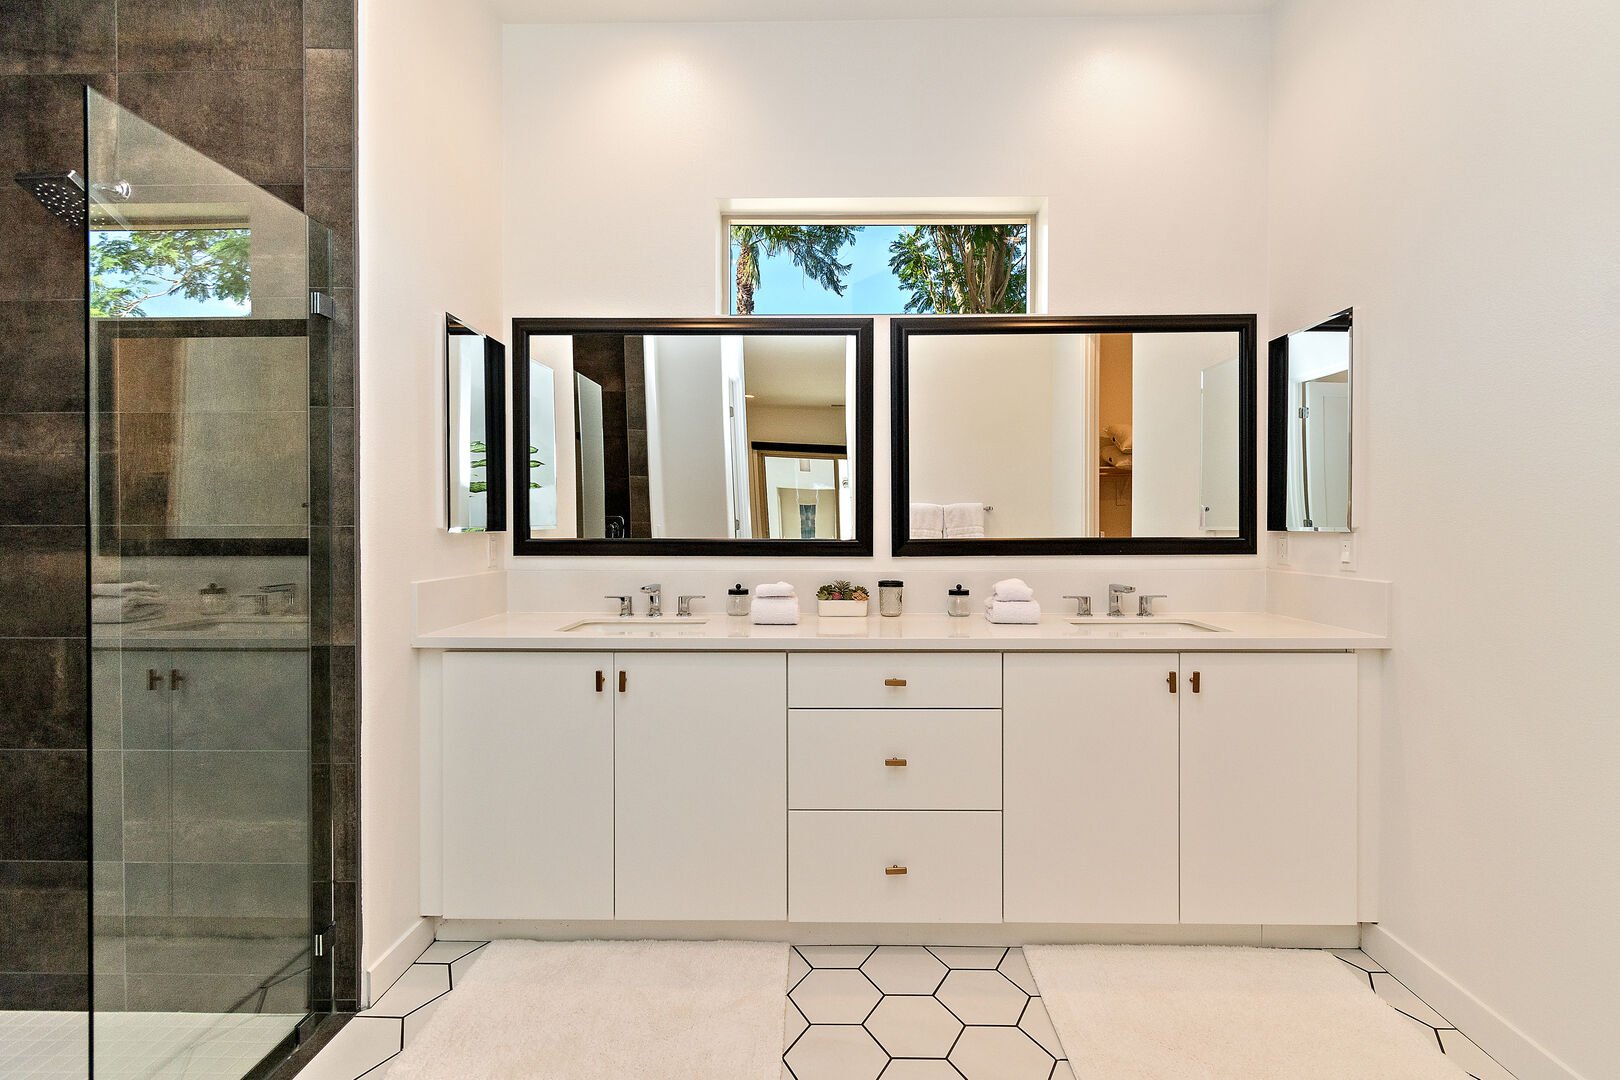 The private en suite bathroom features a tile shower and double vanity sinks.